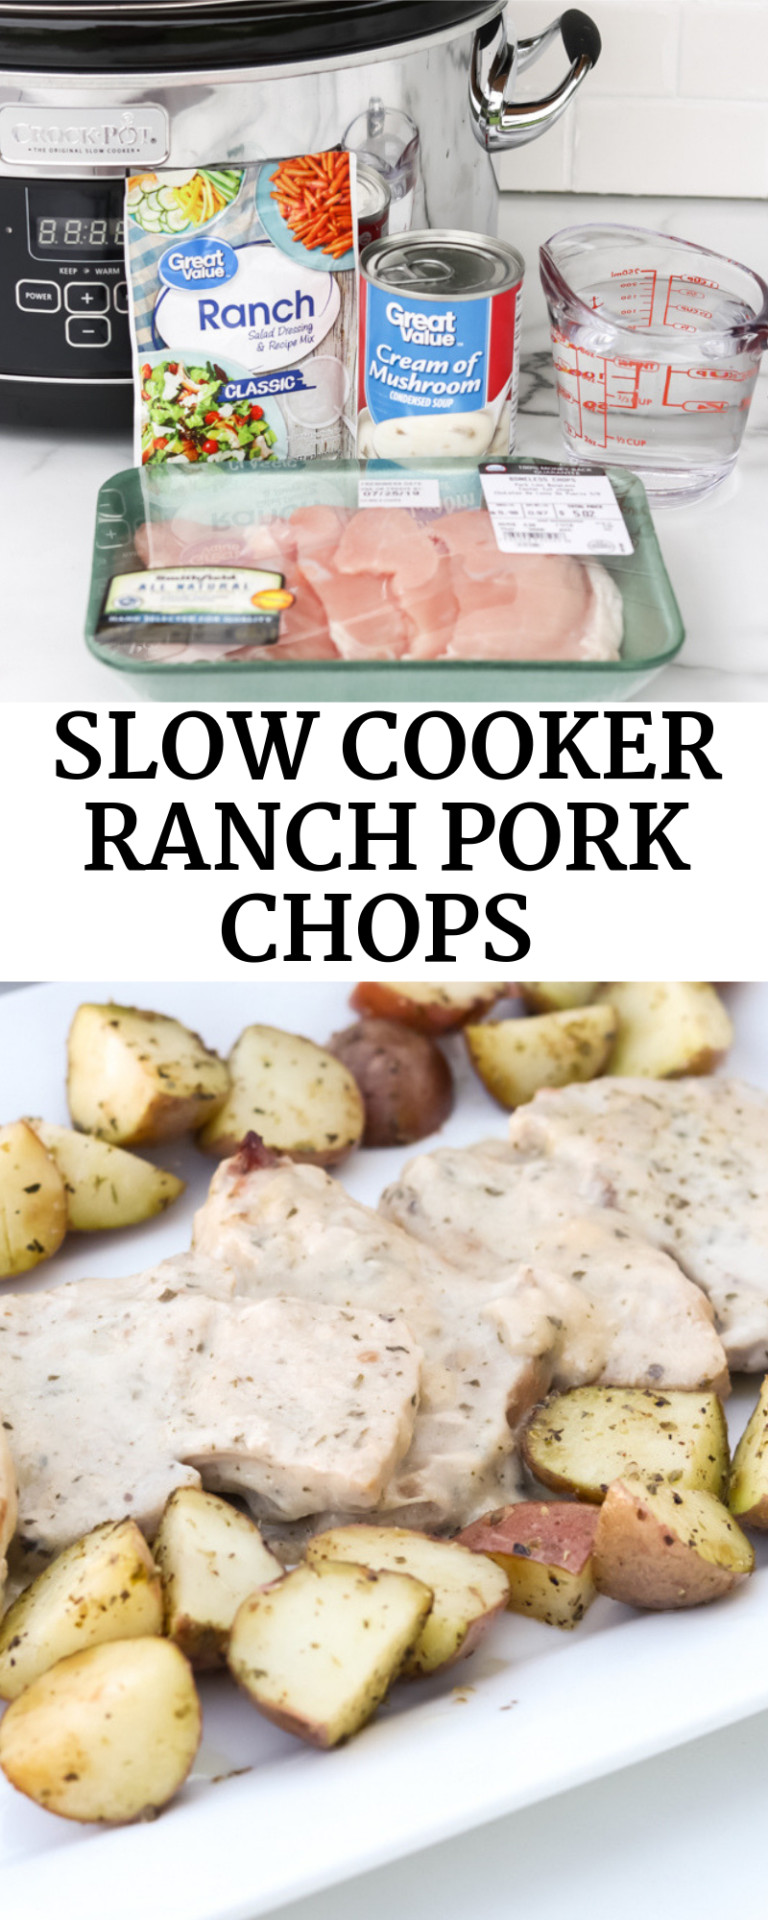 Pork Chops And Red Potatoes Slow Cooker
 Slow Cooker Ranch Pork Chops Recipe